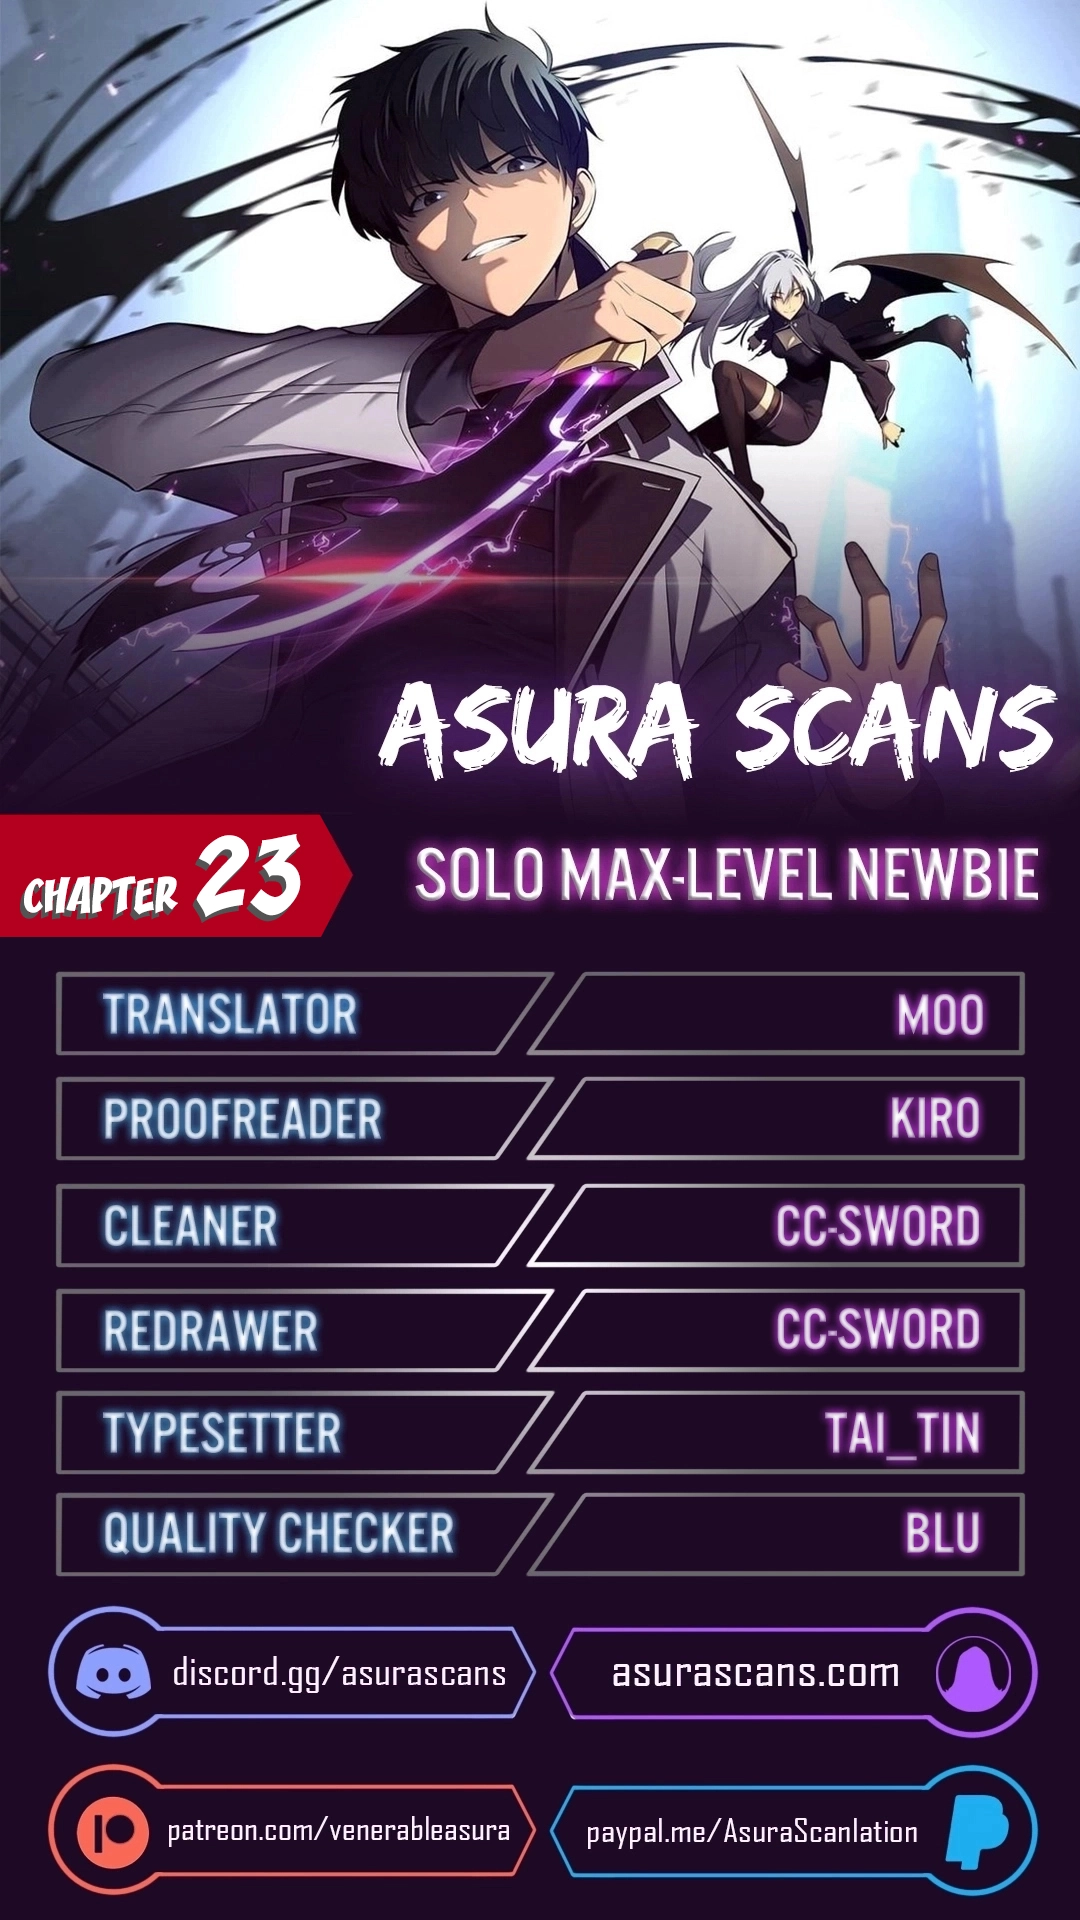 Solo Max-Level Newbie Chapter 23, Solo Max-Level Newbie 23, Read Solo Max-Level Newbie Chapter 23, Solo Max-Level Newbie Chapter 23 Manga, Solo Max-Level Newbie Chapter 23 english, Solo Max-Level Newbie Chapter 23 raw manga, Solo Max-Level Newbie Chapter 23 online, Solo Max-Level Newbie Chapter 23 high quality, Solo Max-Level Newbie 23 chapter, Solo Max-Level Newbie Chapter 23 manga scan